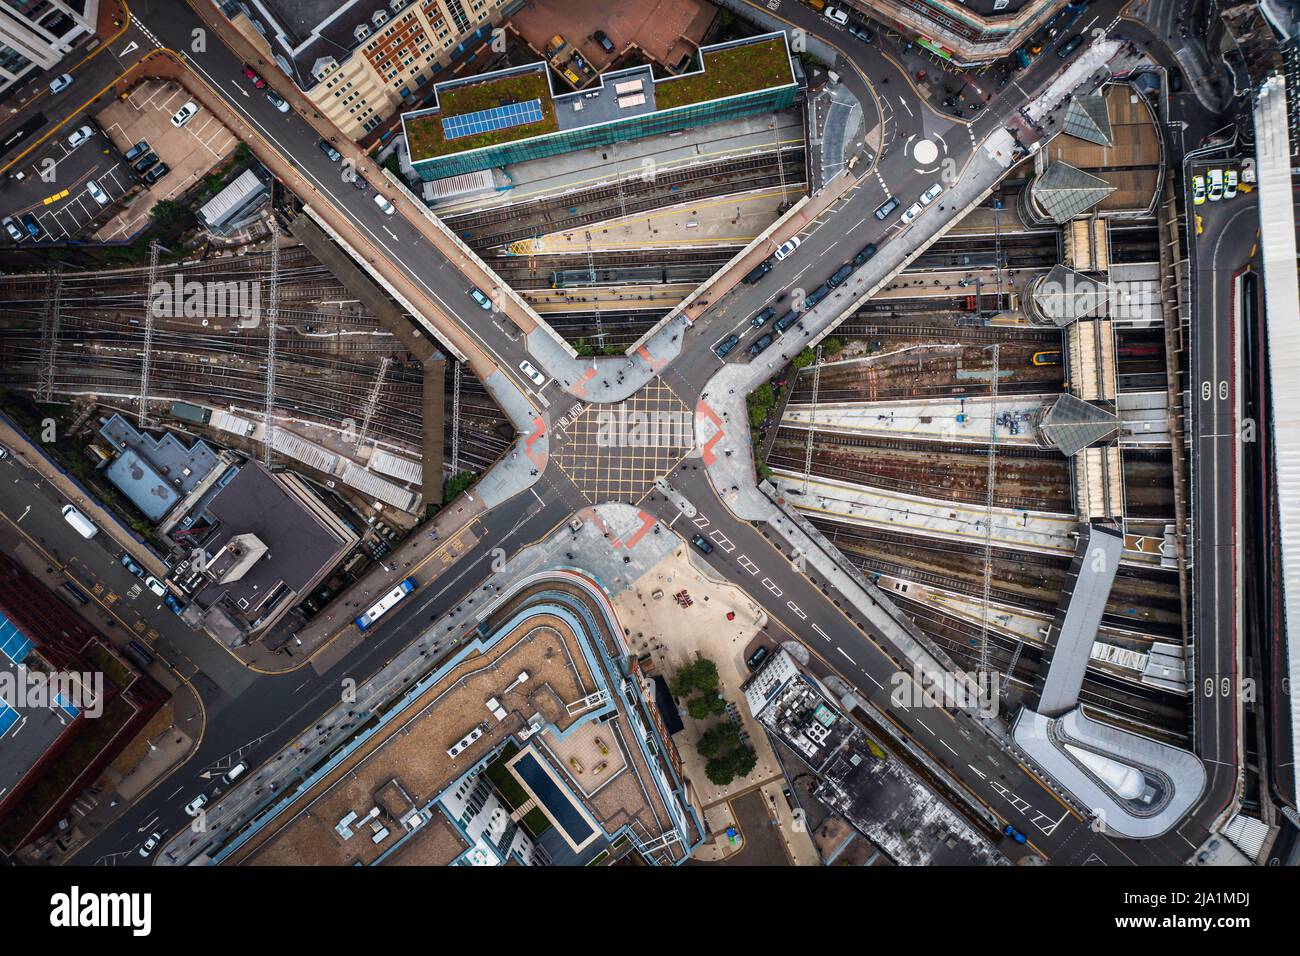 An aerial view directly above an urban metropolis with crossroad street junction over busy railway and underground subway tracks Stock Photo